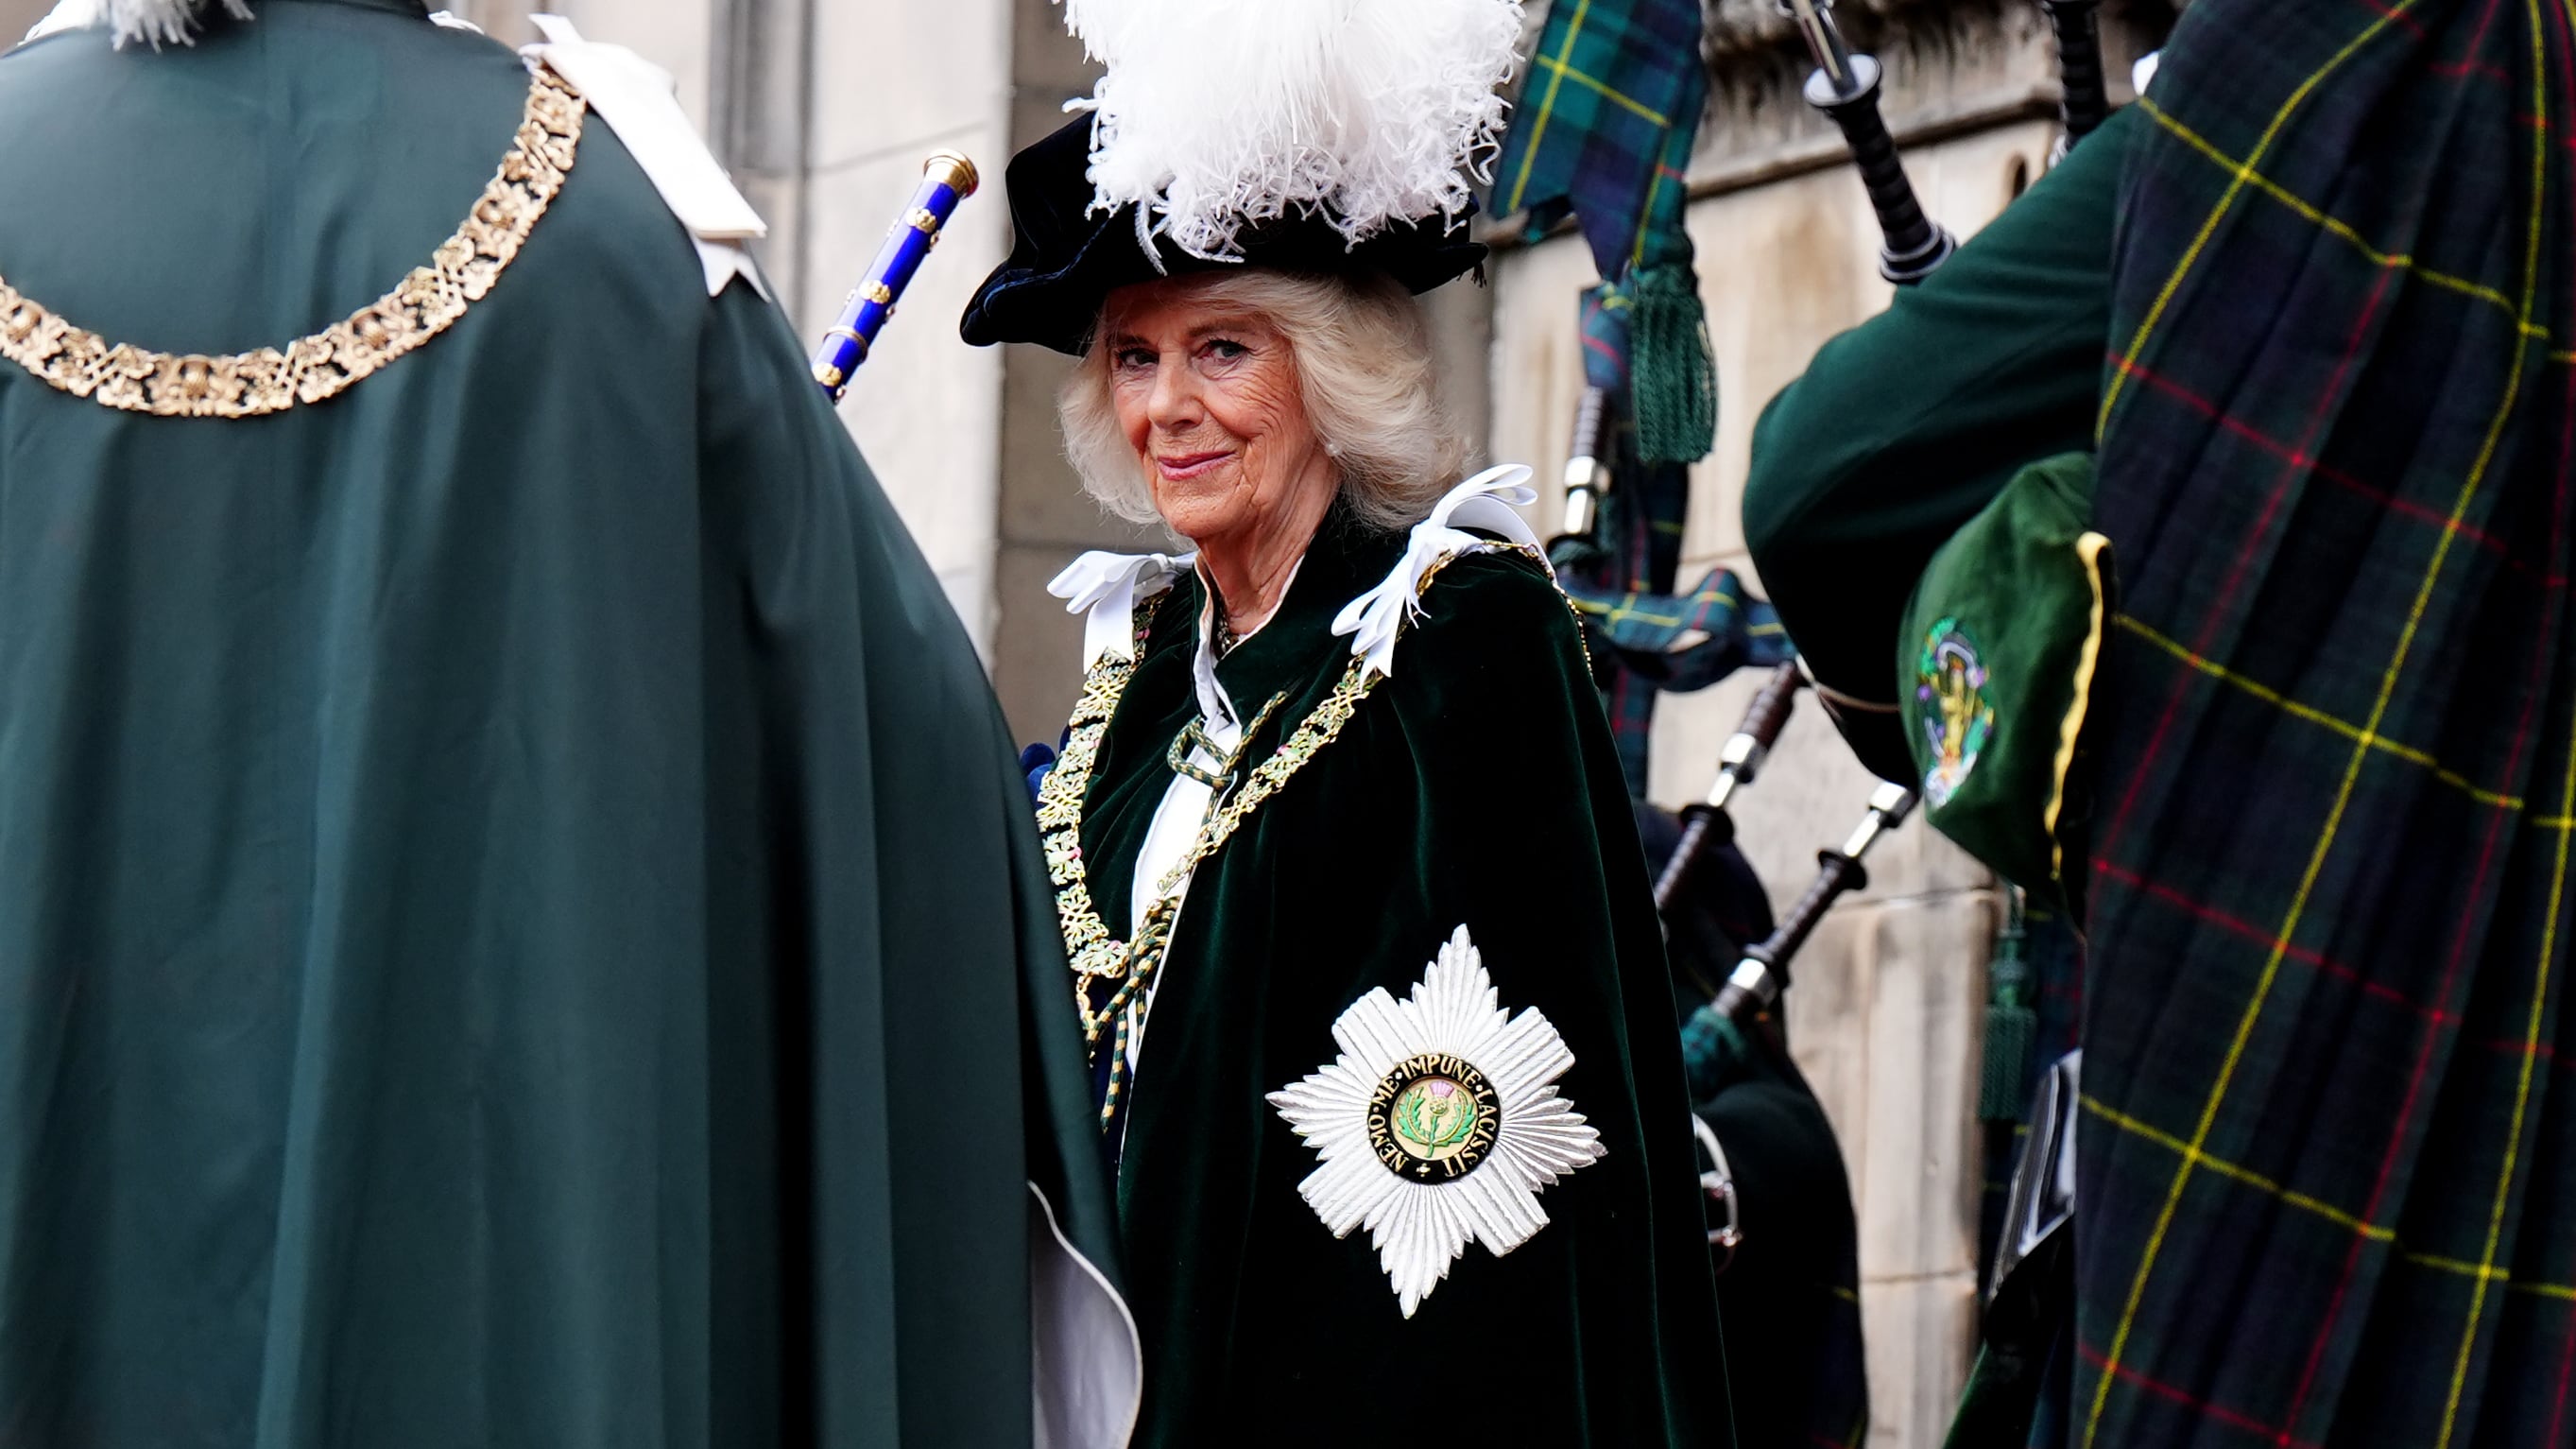 The Queen leaving the Order of the Thistle service at St Giles’ Cathedral in Edinburgh